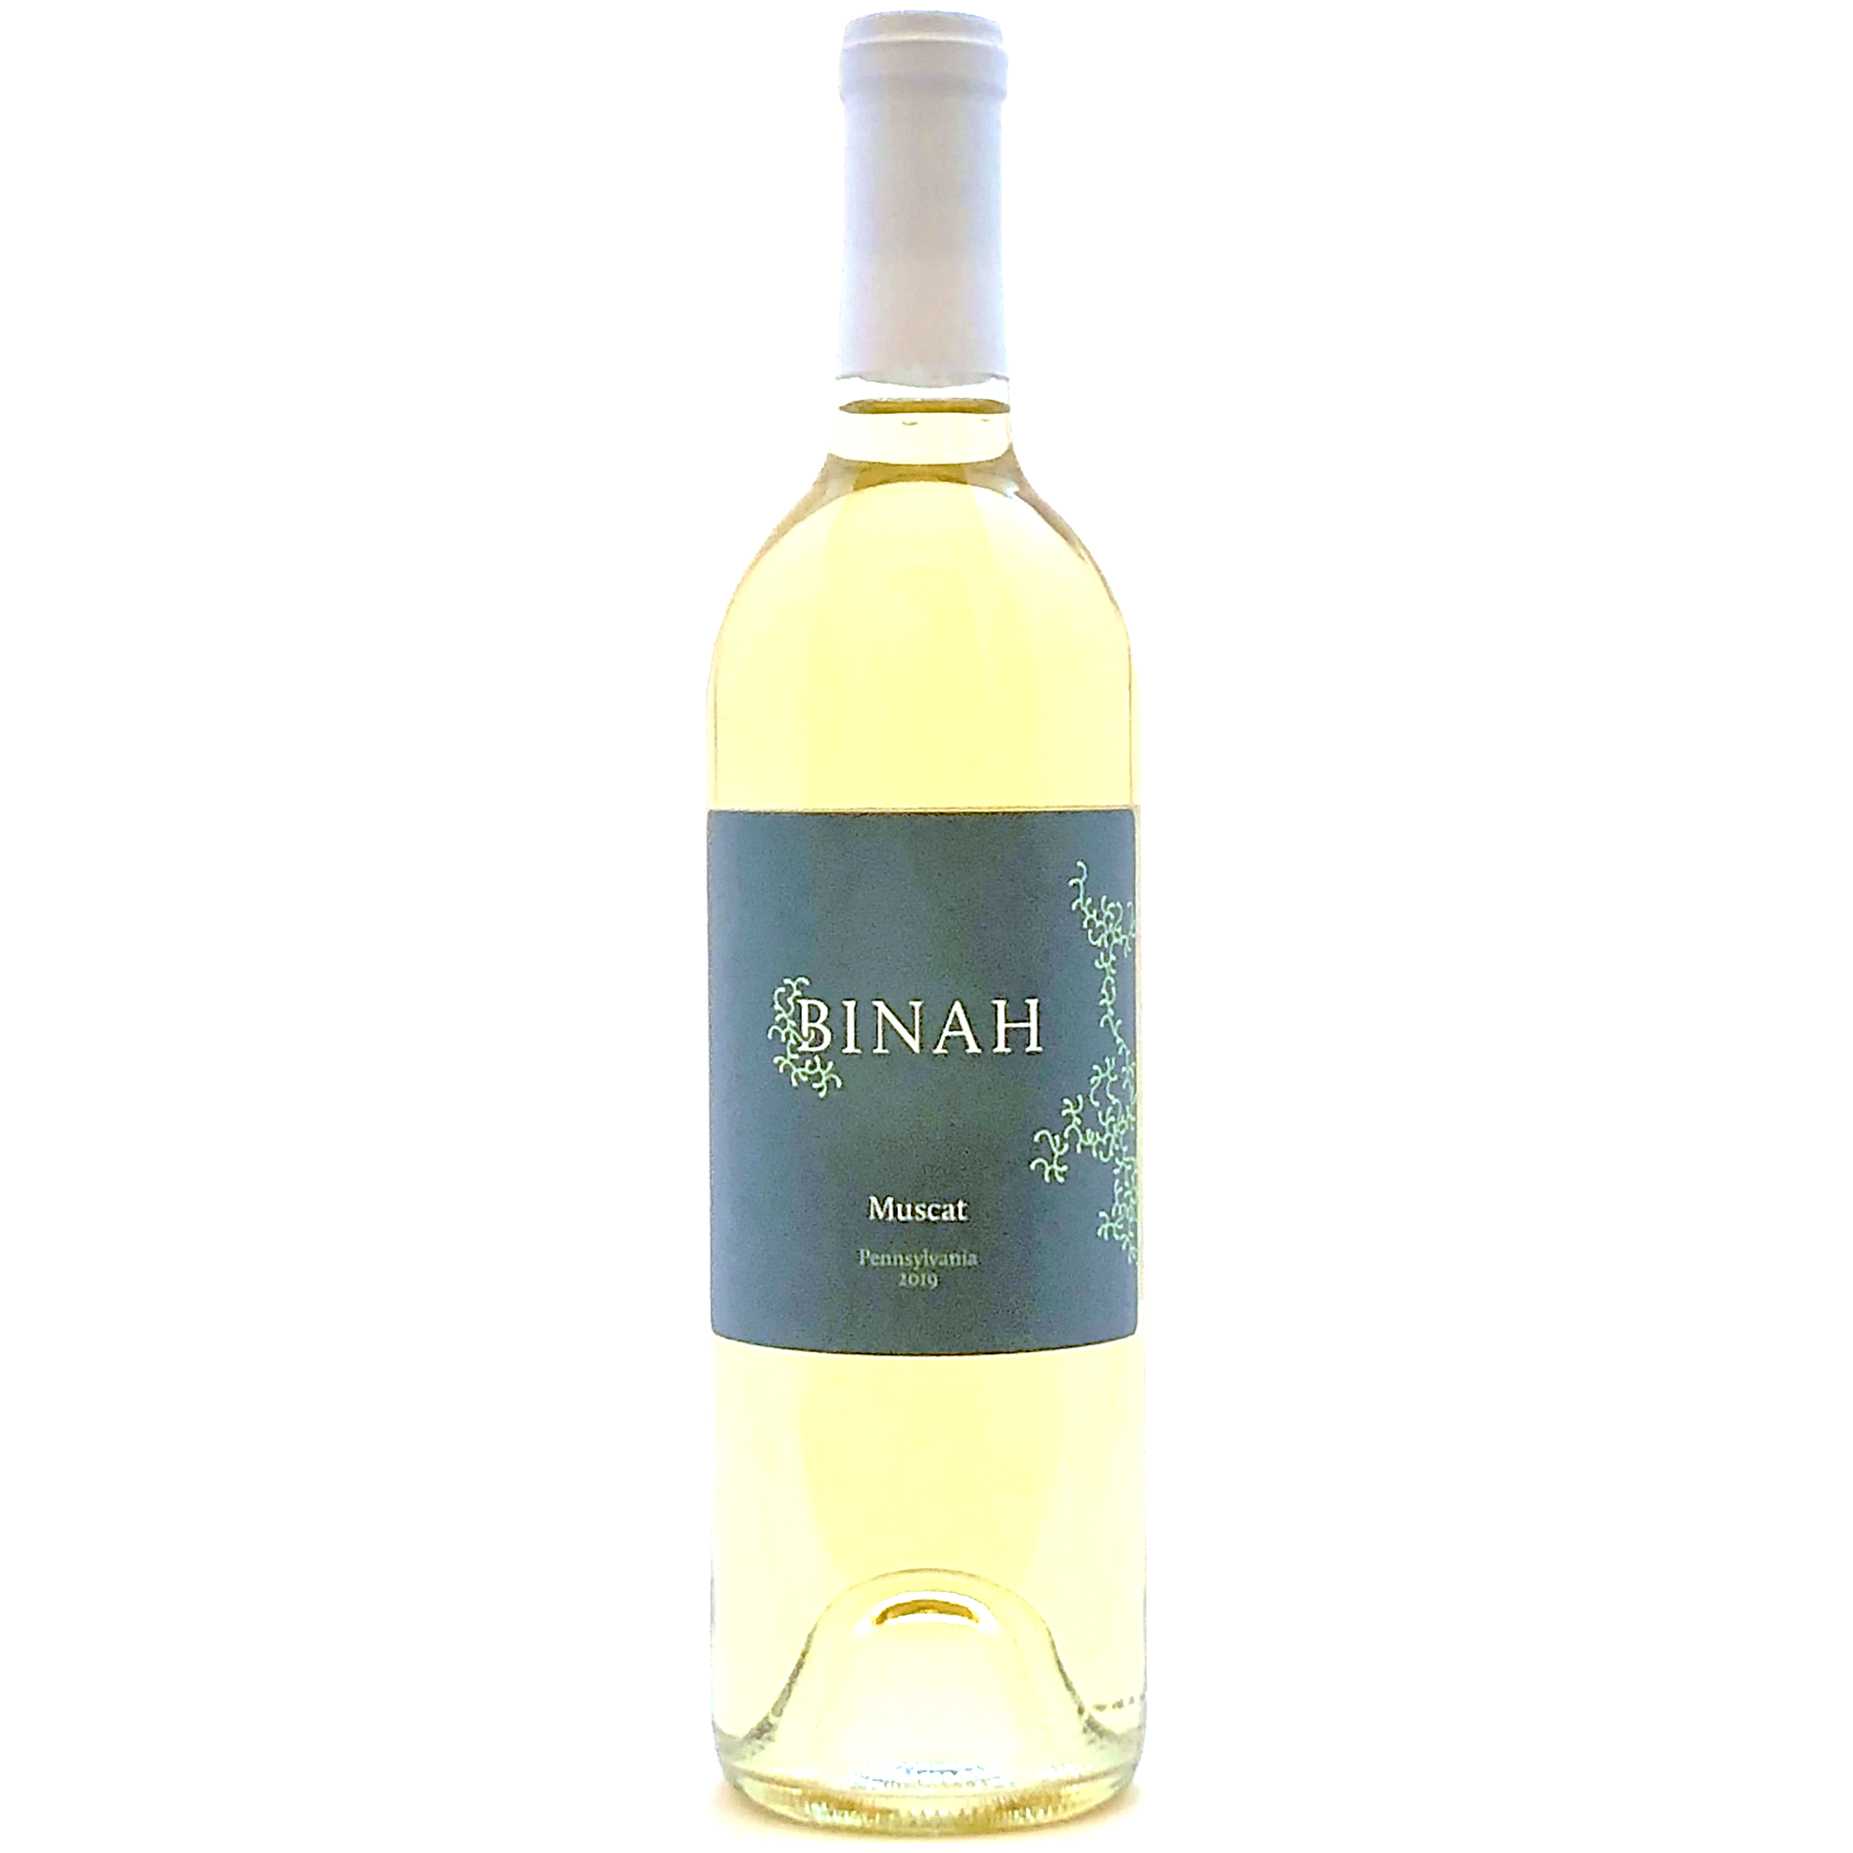 Binah Muscat - A Kosher Wine From Other Us